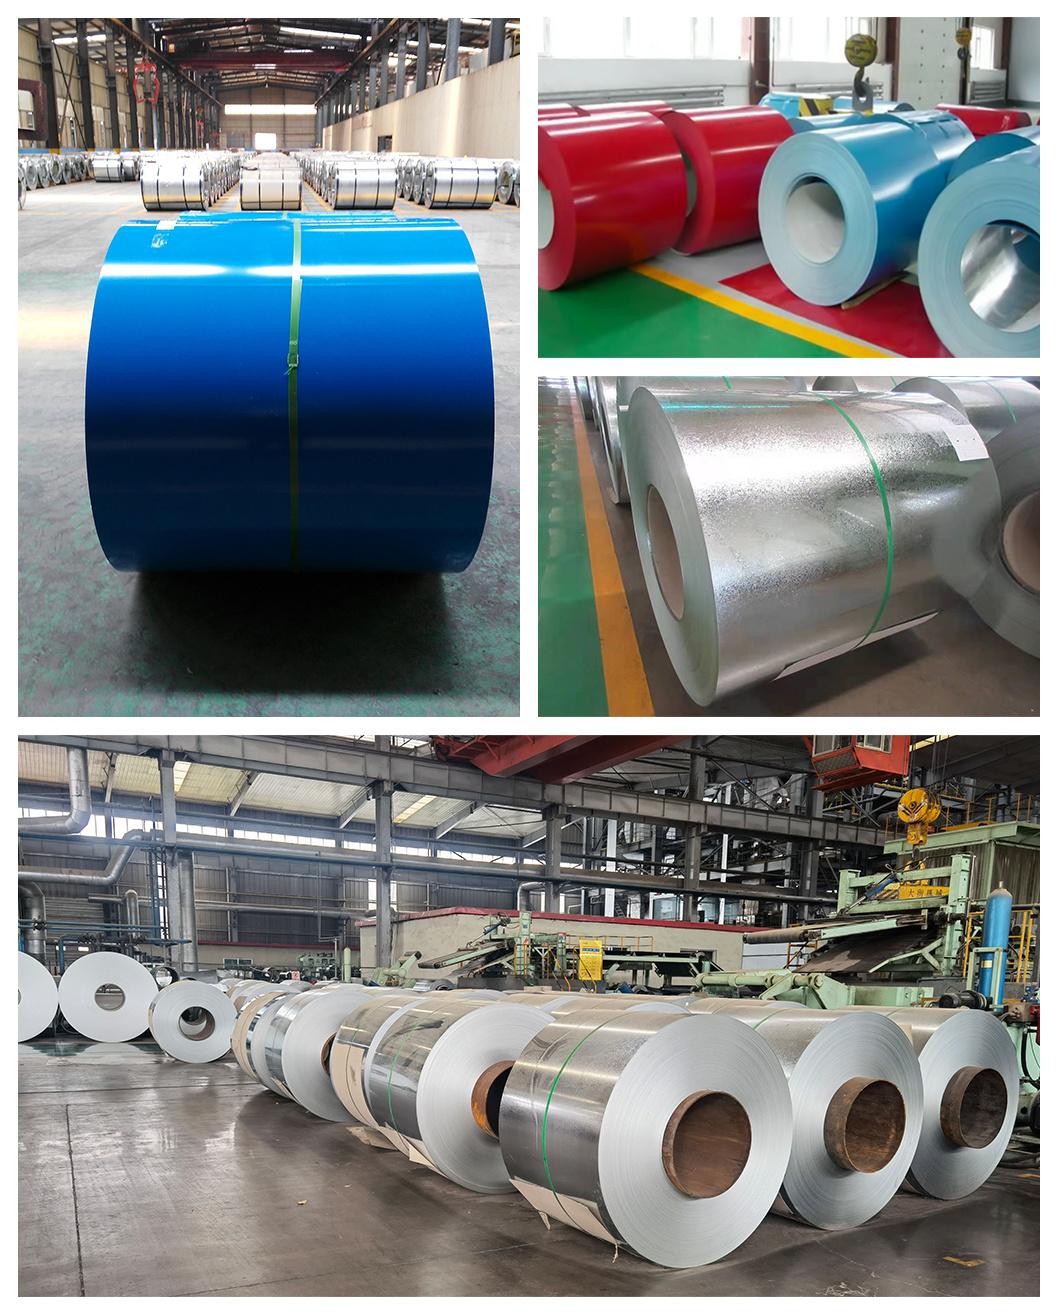 Factory Price Cold Rolled Z40-Z275 Roofing Sheet Metal Rolls Steel Hot DIP Galvanised Coil Sq Cr22 (230) Sq Cr22 (255) Sq Cr40 (275)